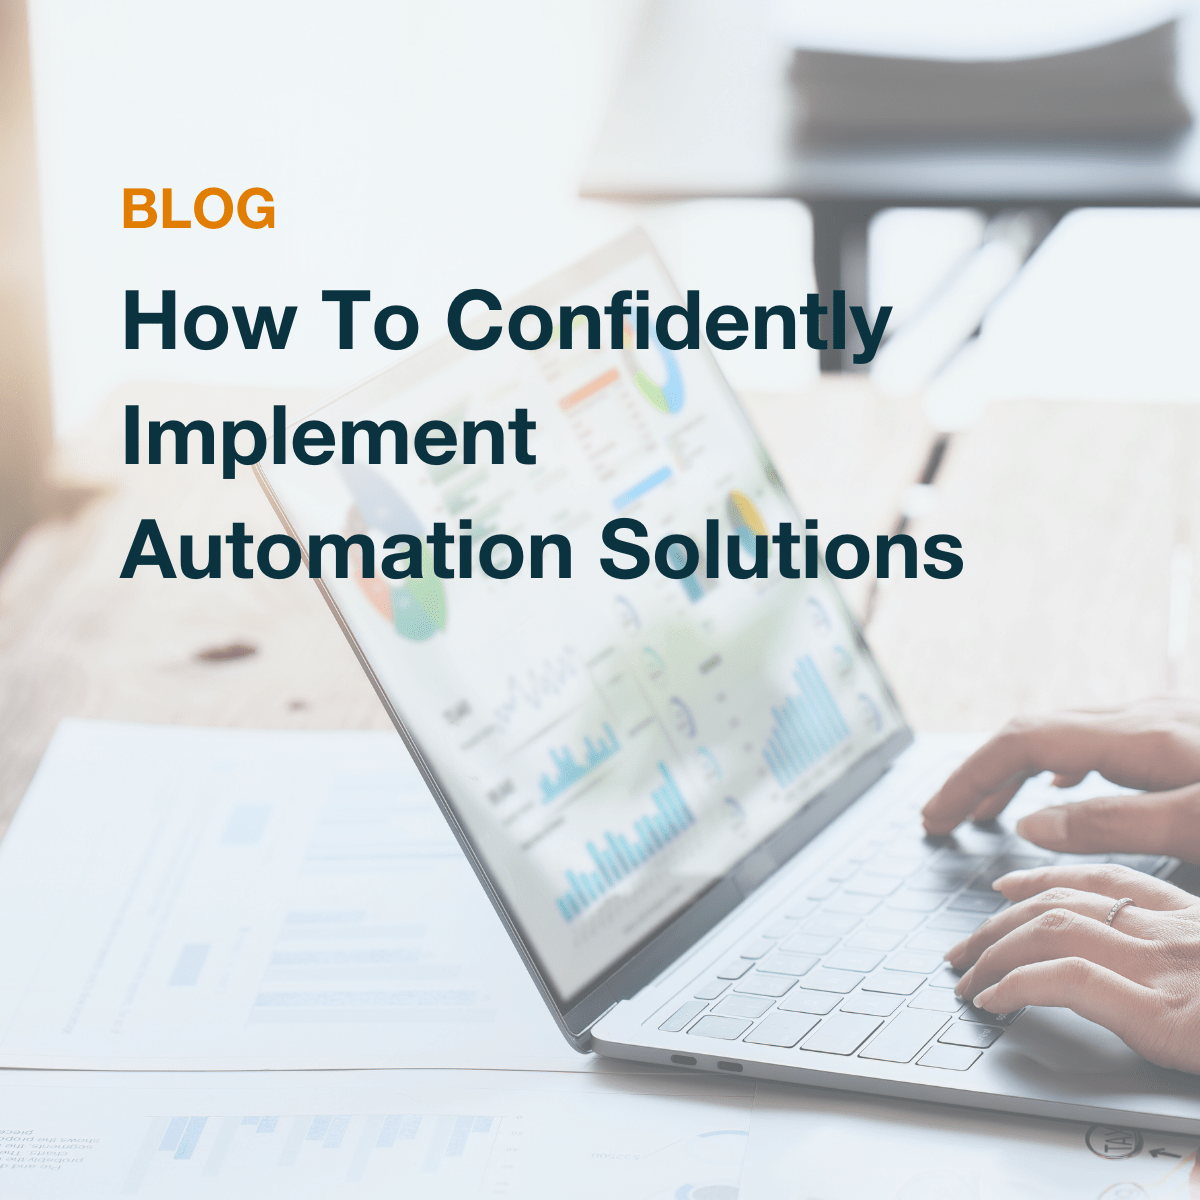 How To Confidently Implement Automation Solutions